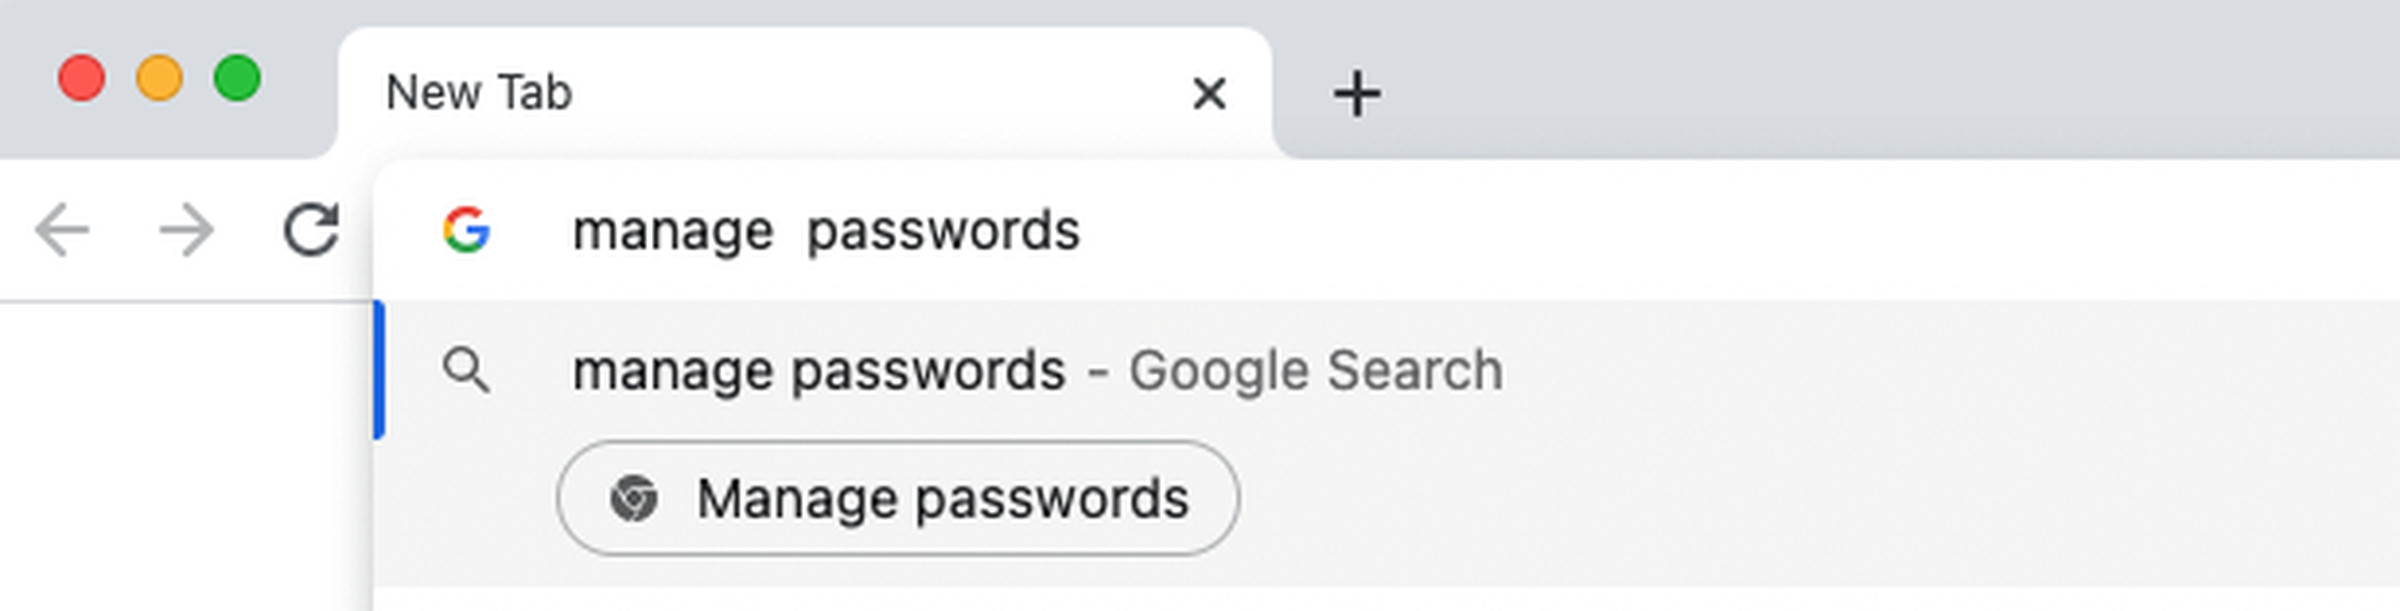 A Chrome Action for managing passwords using the browser’s built-in tool.